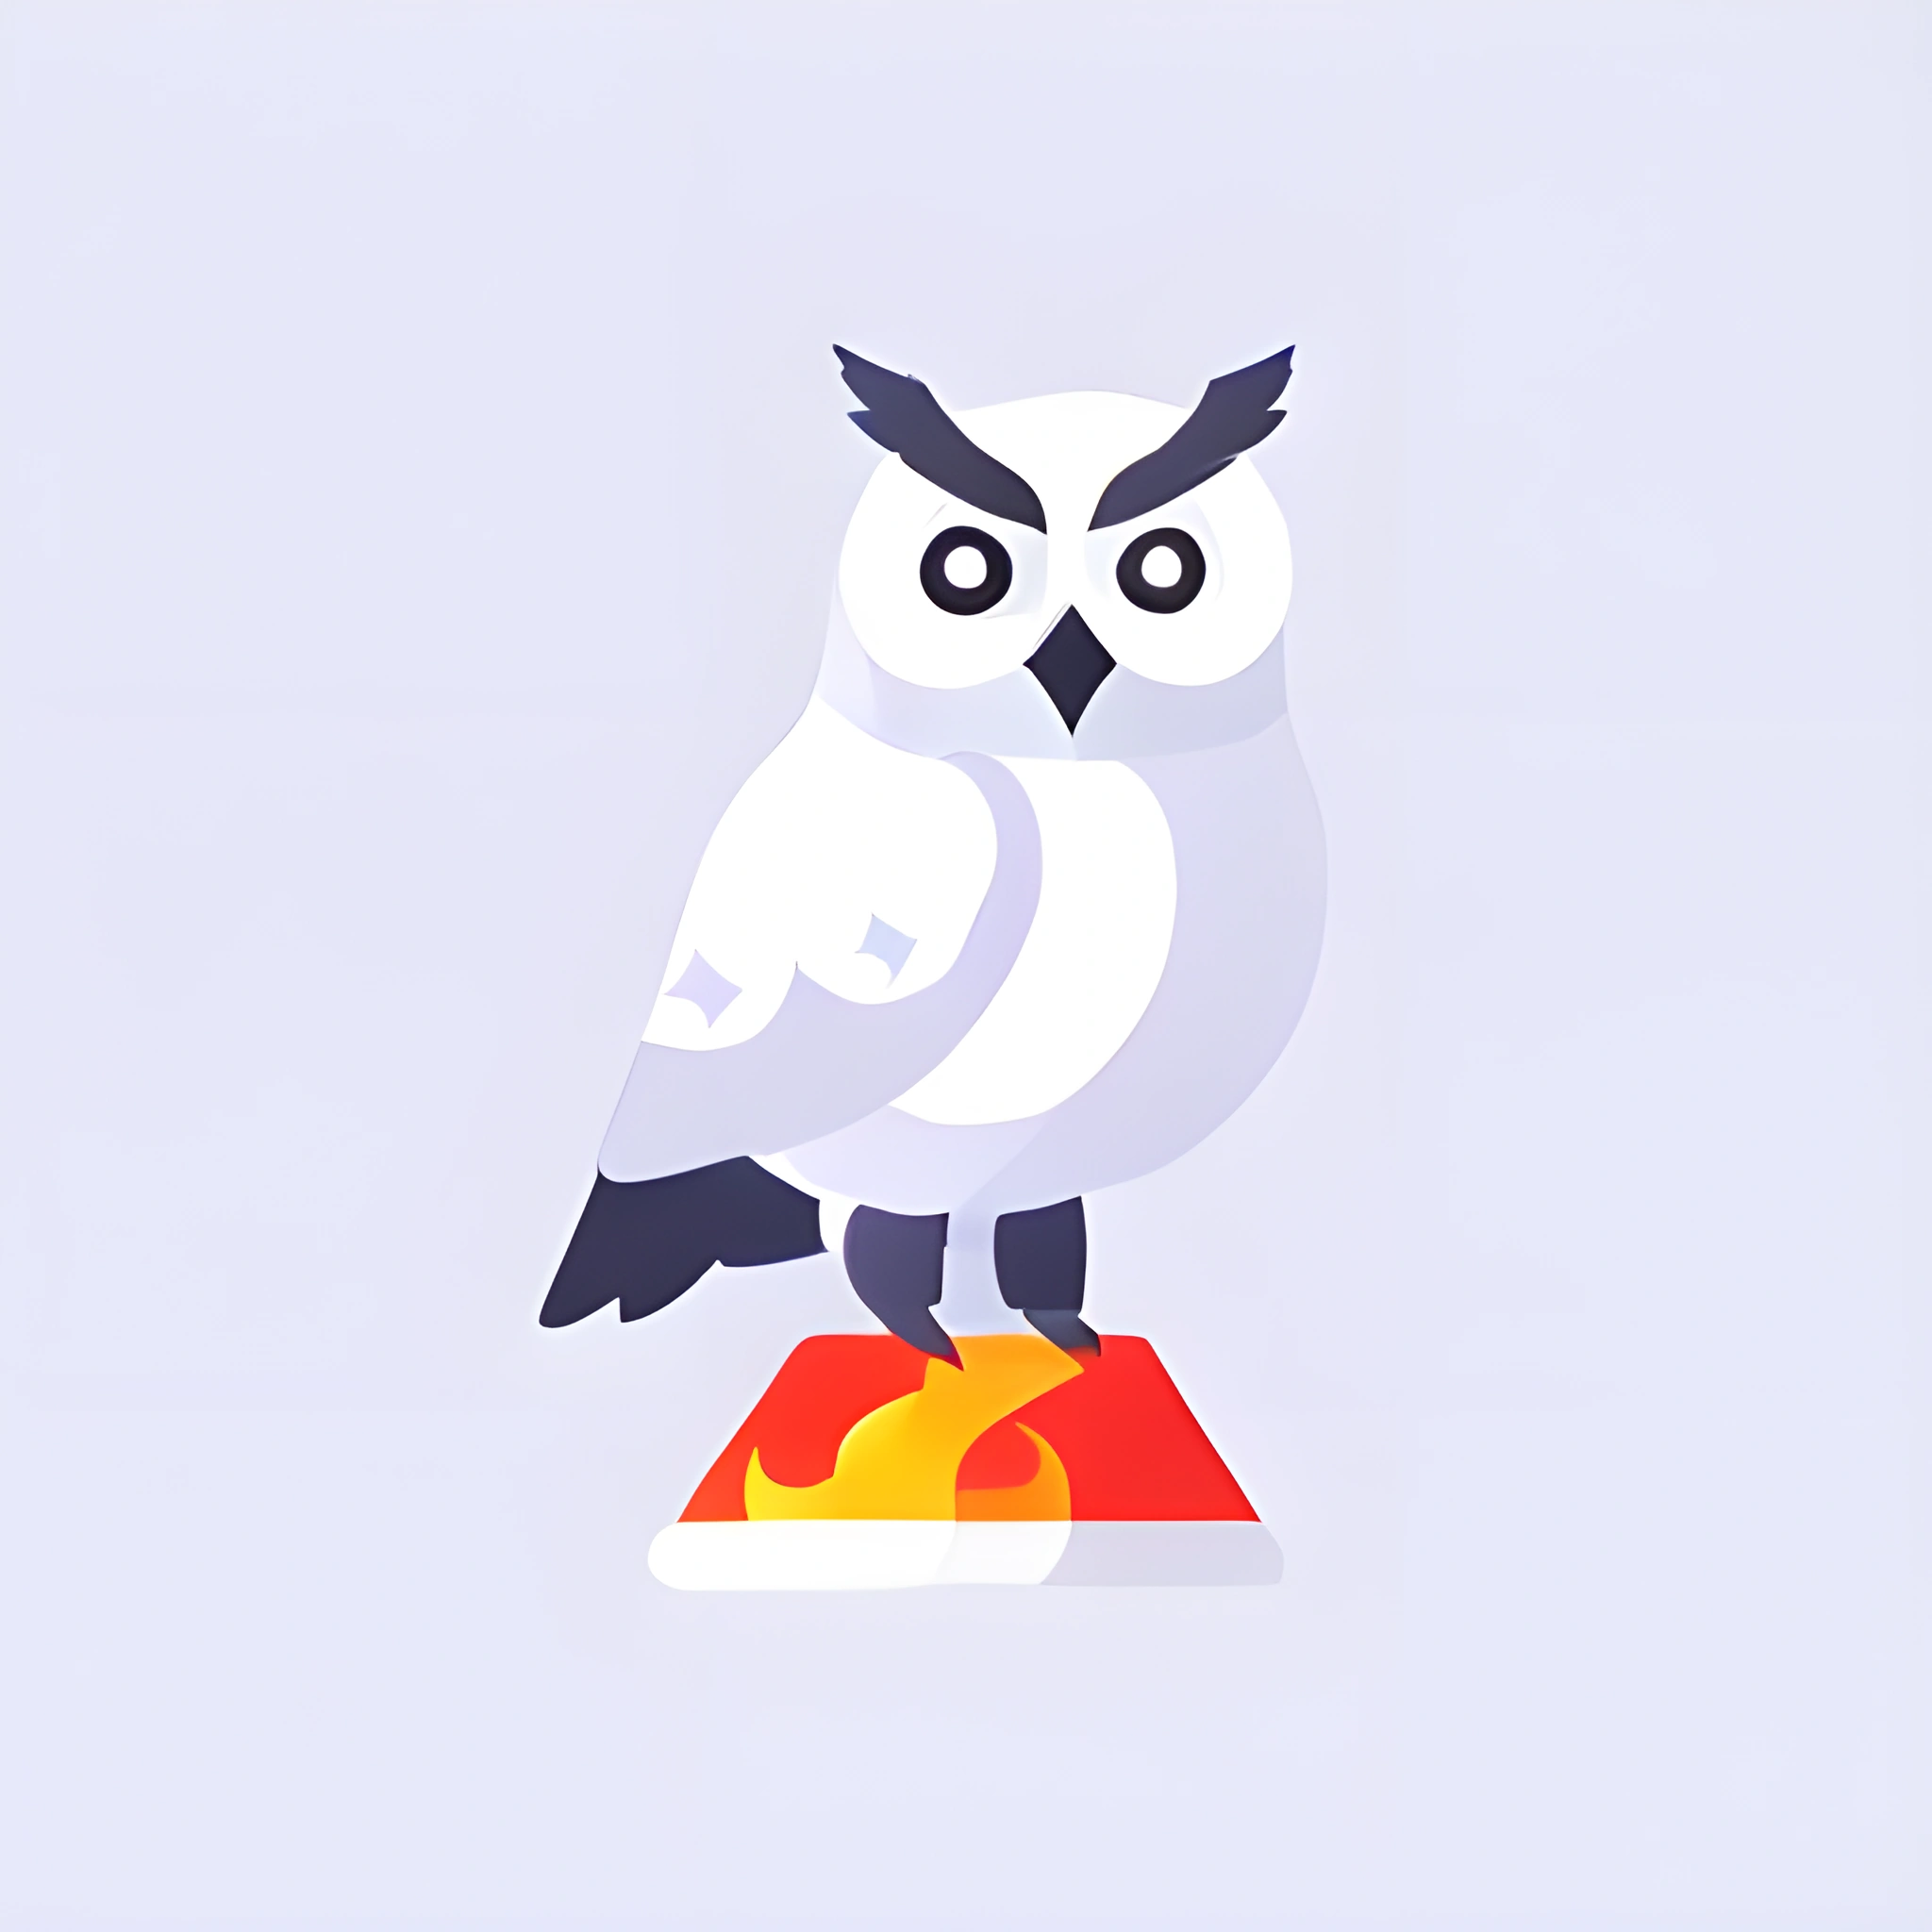 a white owl sitting on a red object